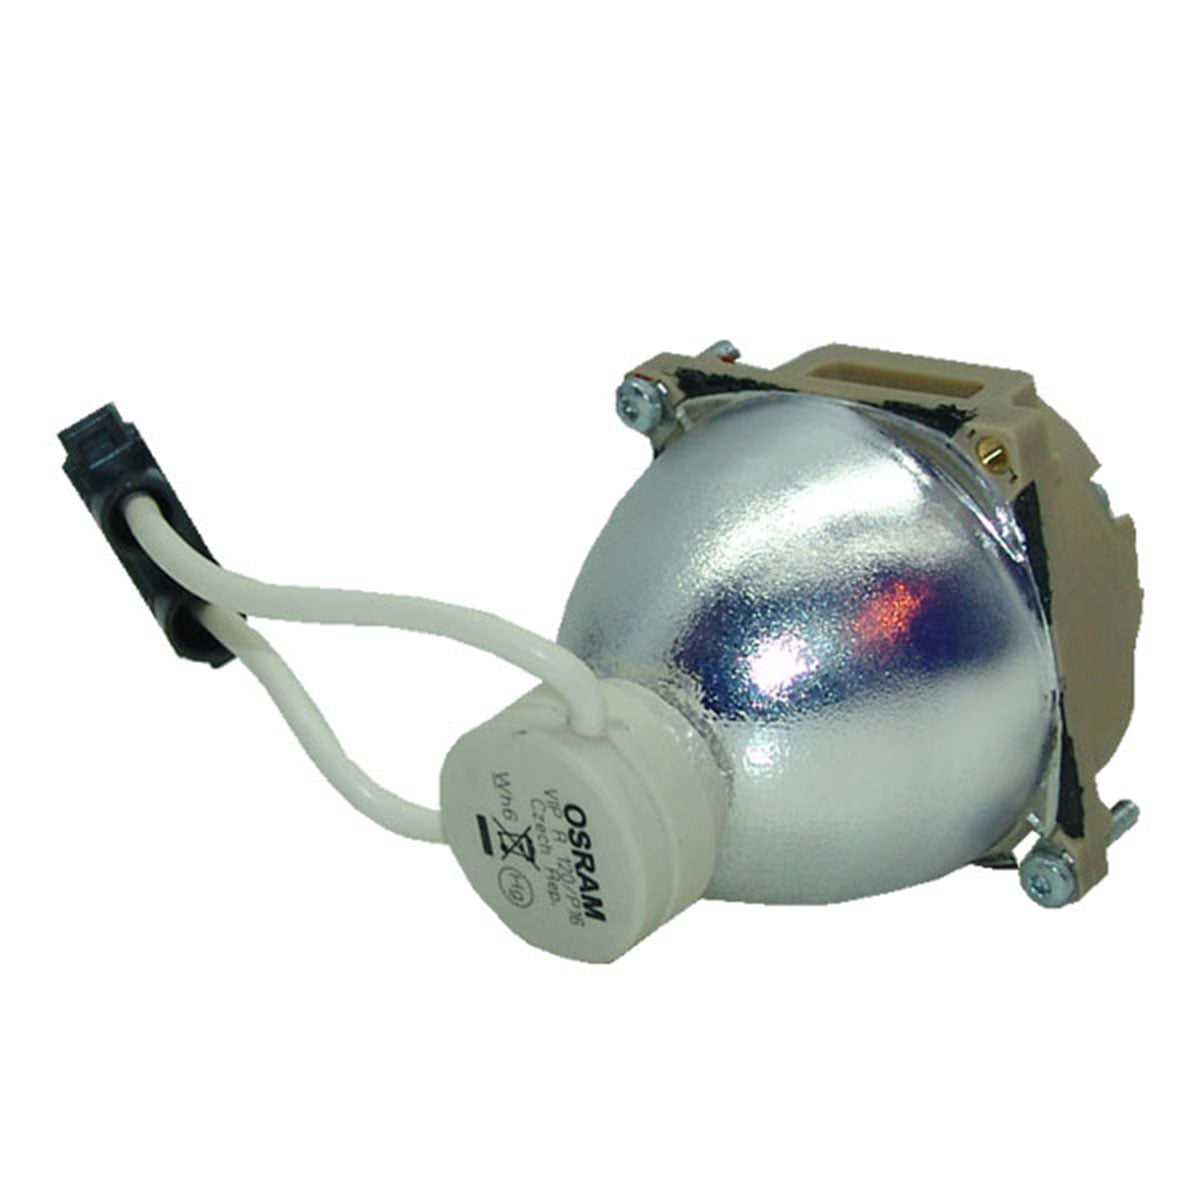 Original Osram Projector Lamp Replacement with Housing for IIYAMA DPS 100